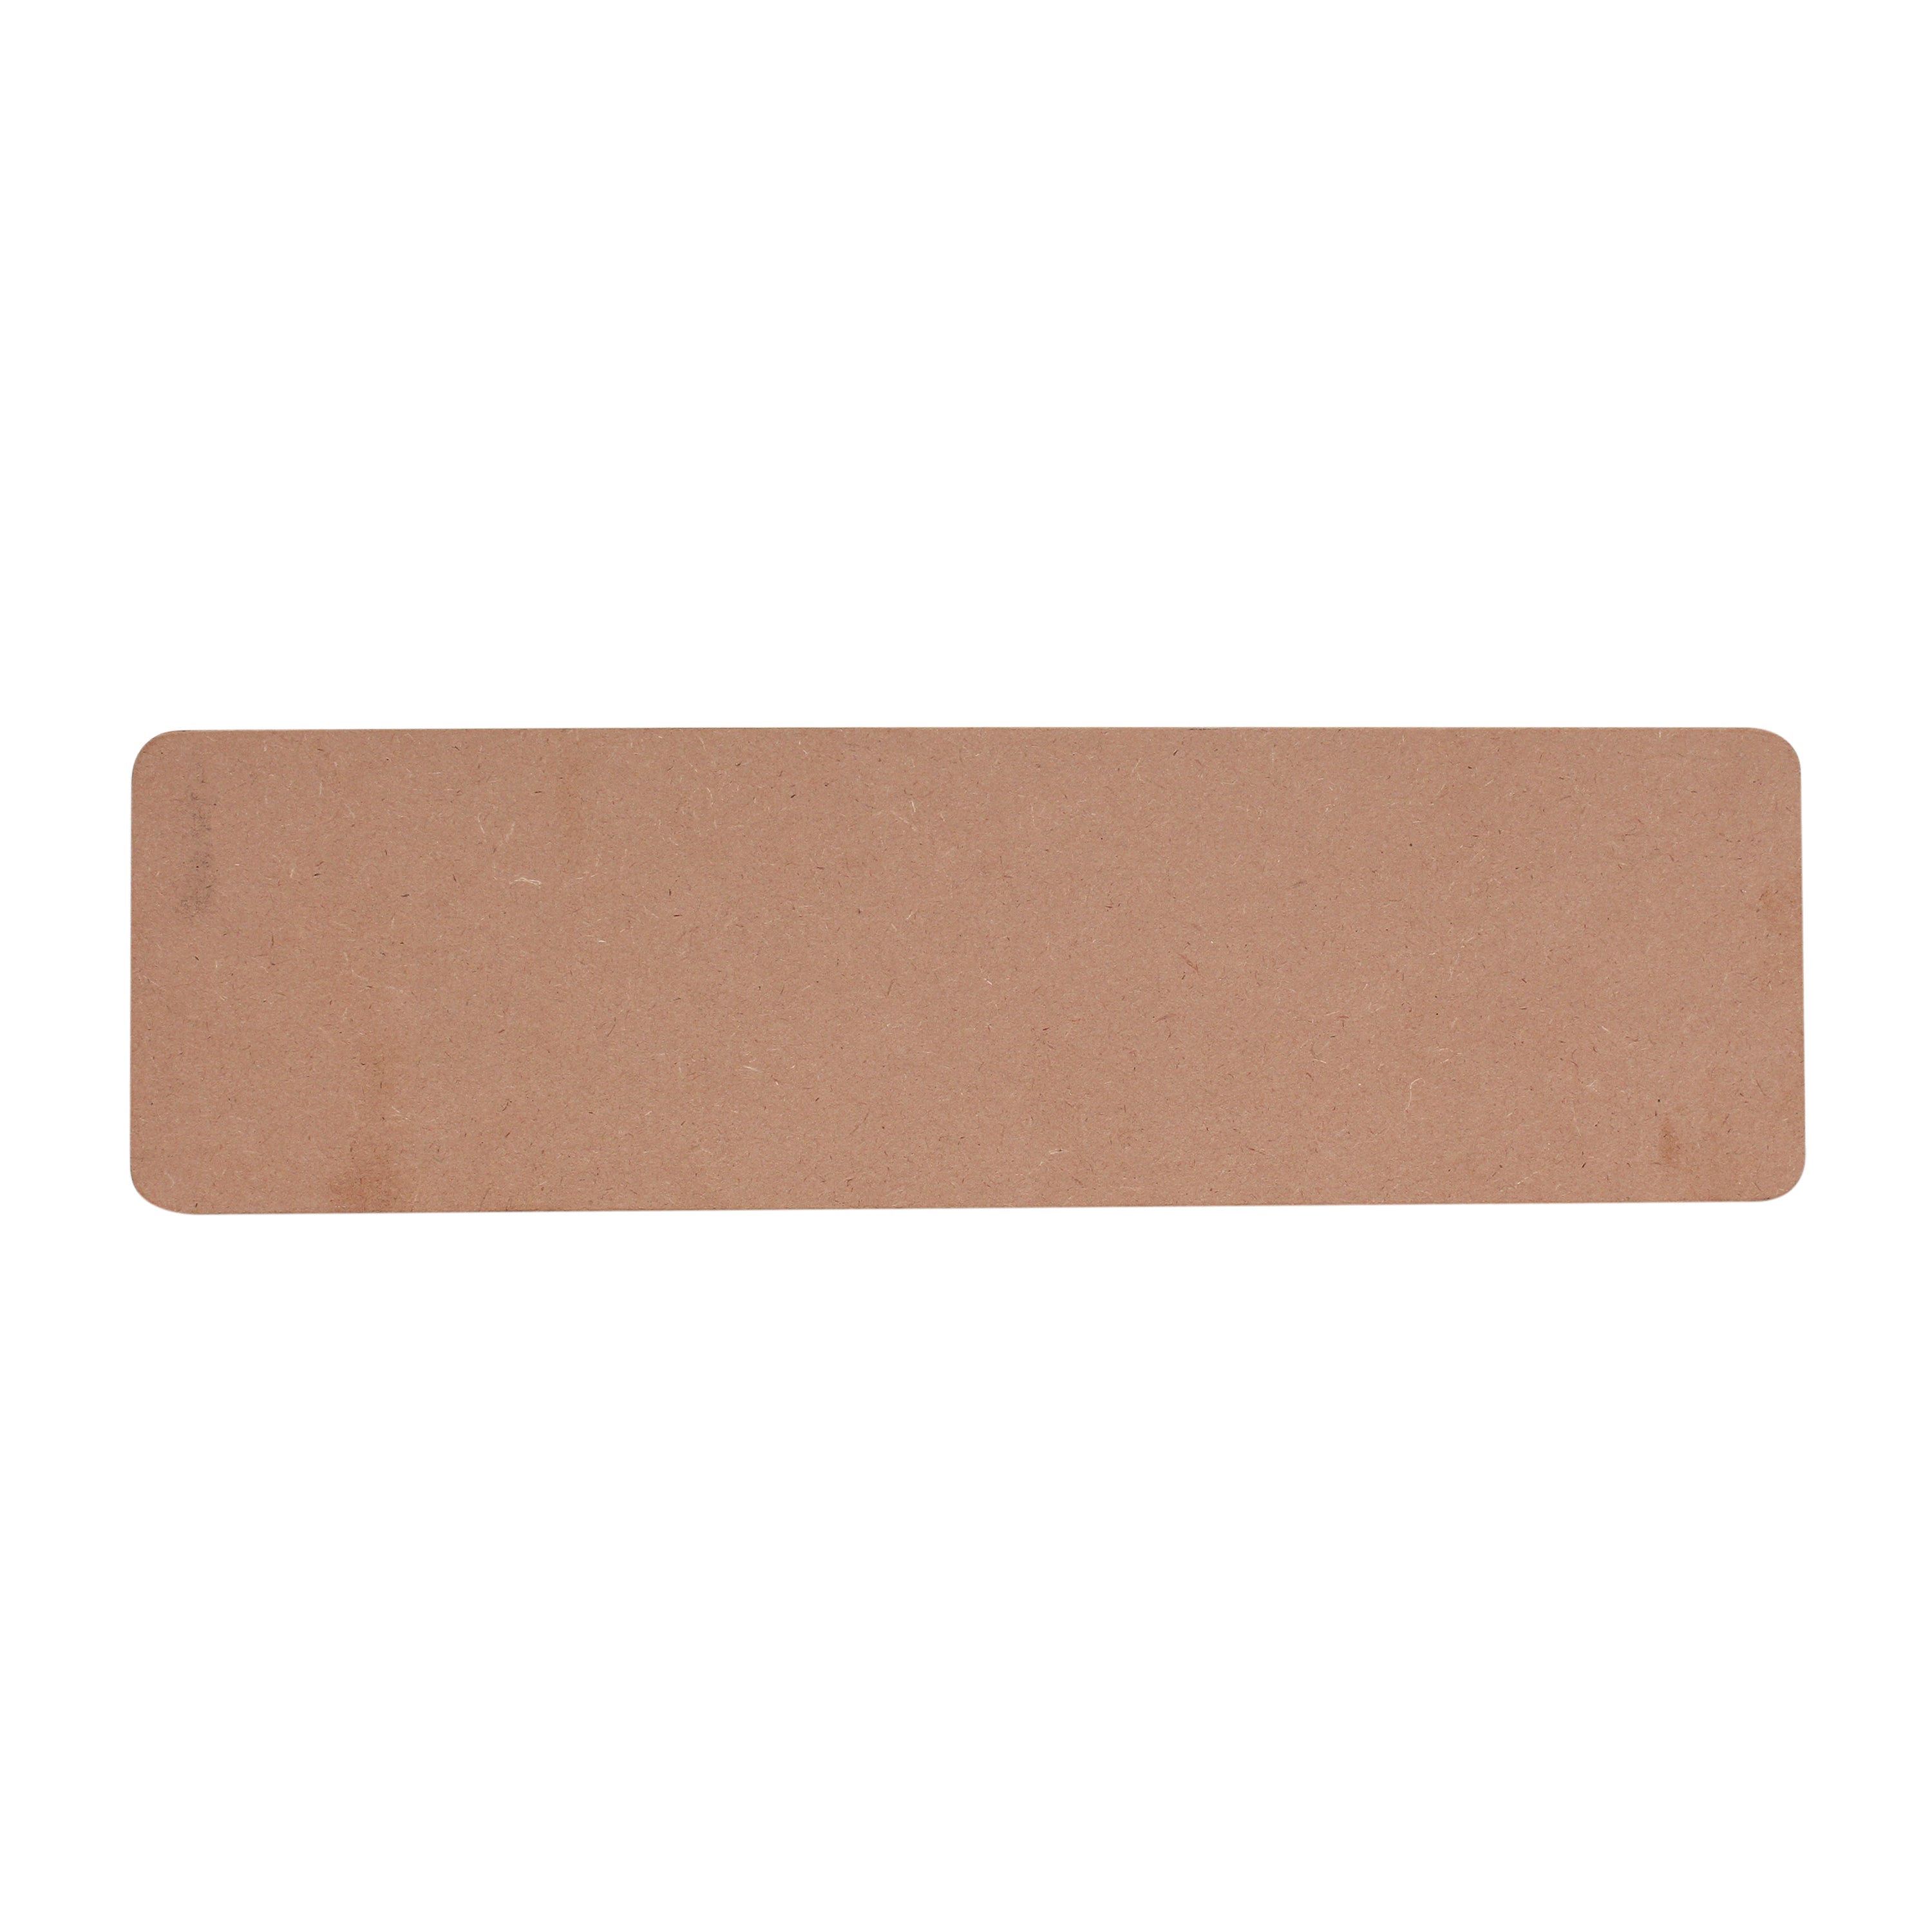 Mdf Blank Rectangle 12 X 4Inch 5.5Mm Thick 1Pc Lb